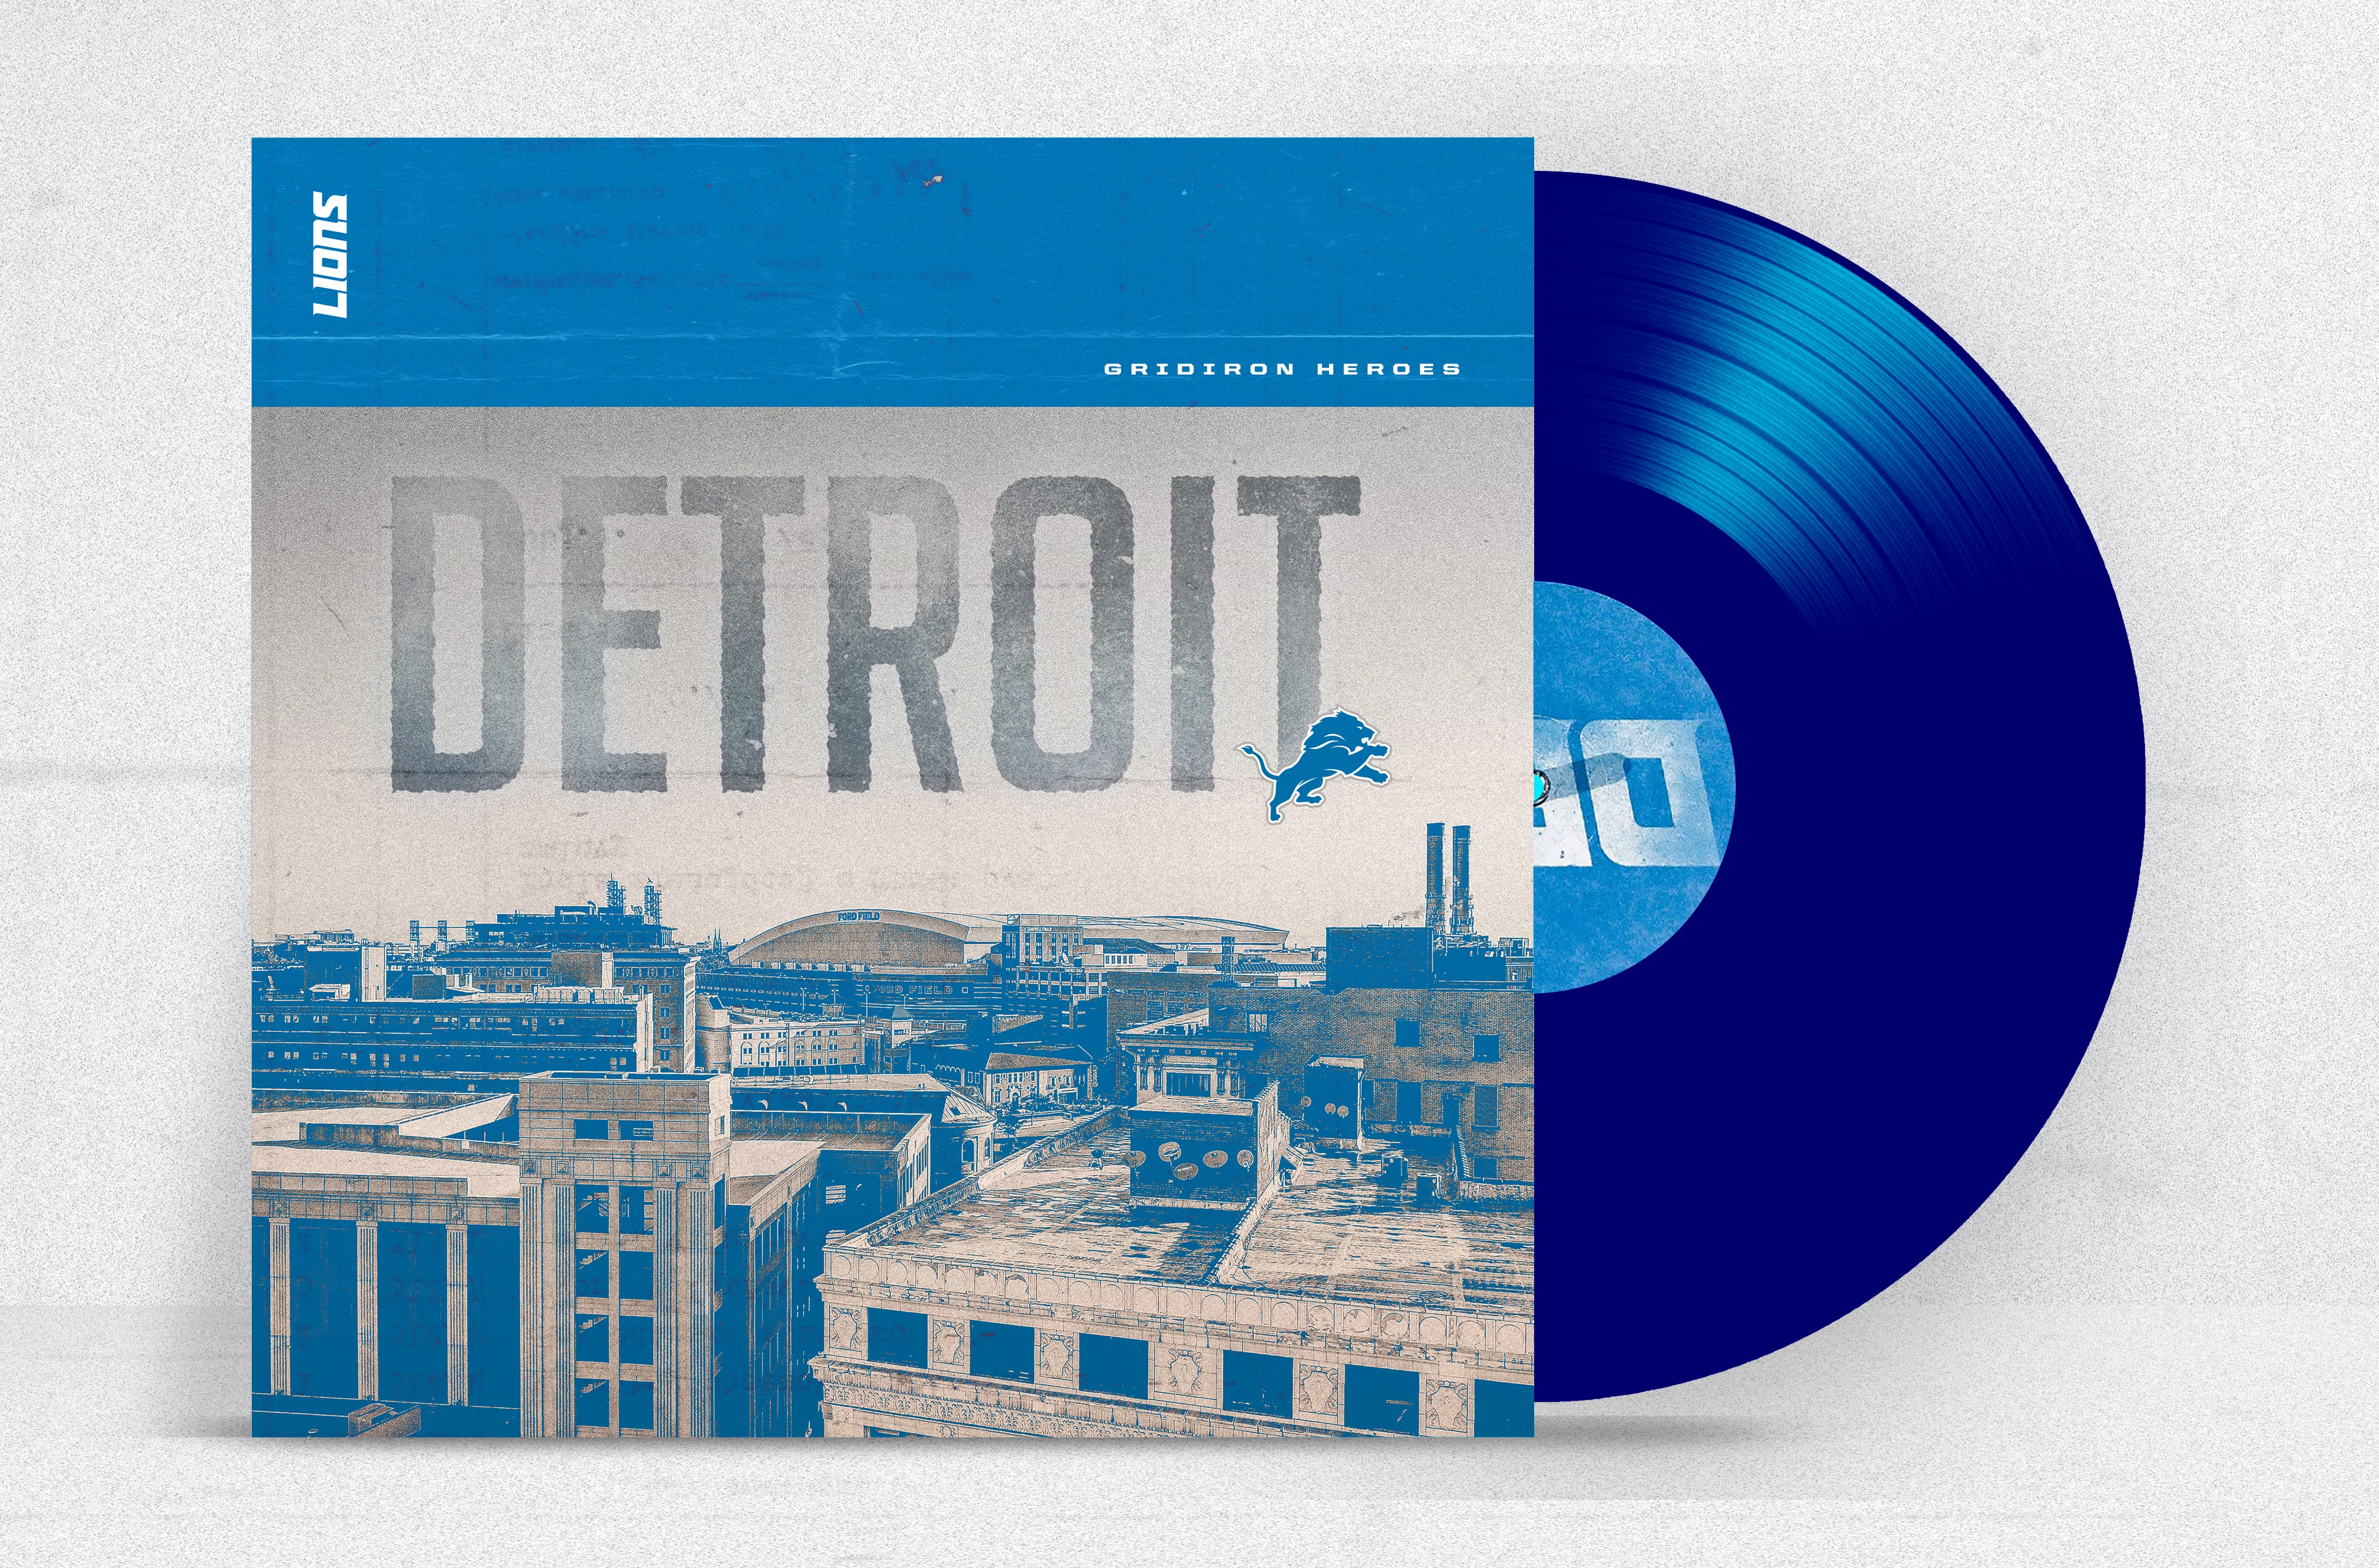 A cover and vinyl record that showcase the city of Detroit.